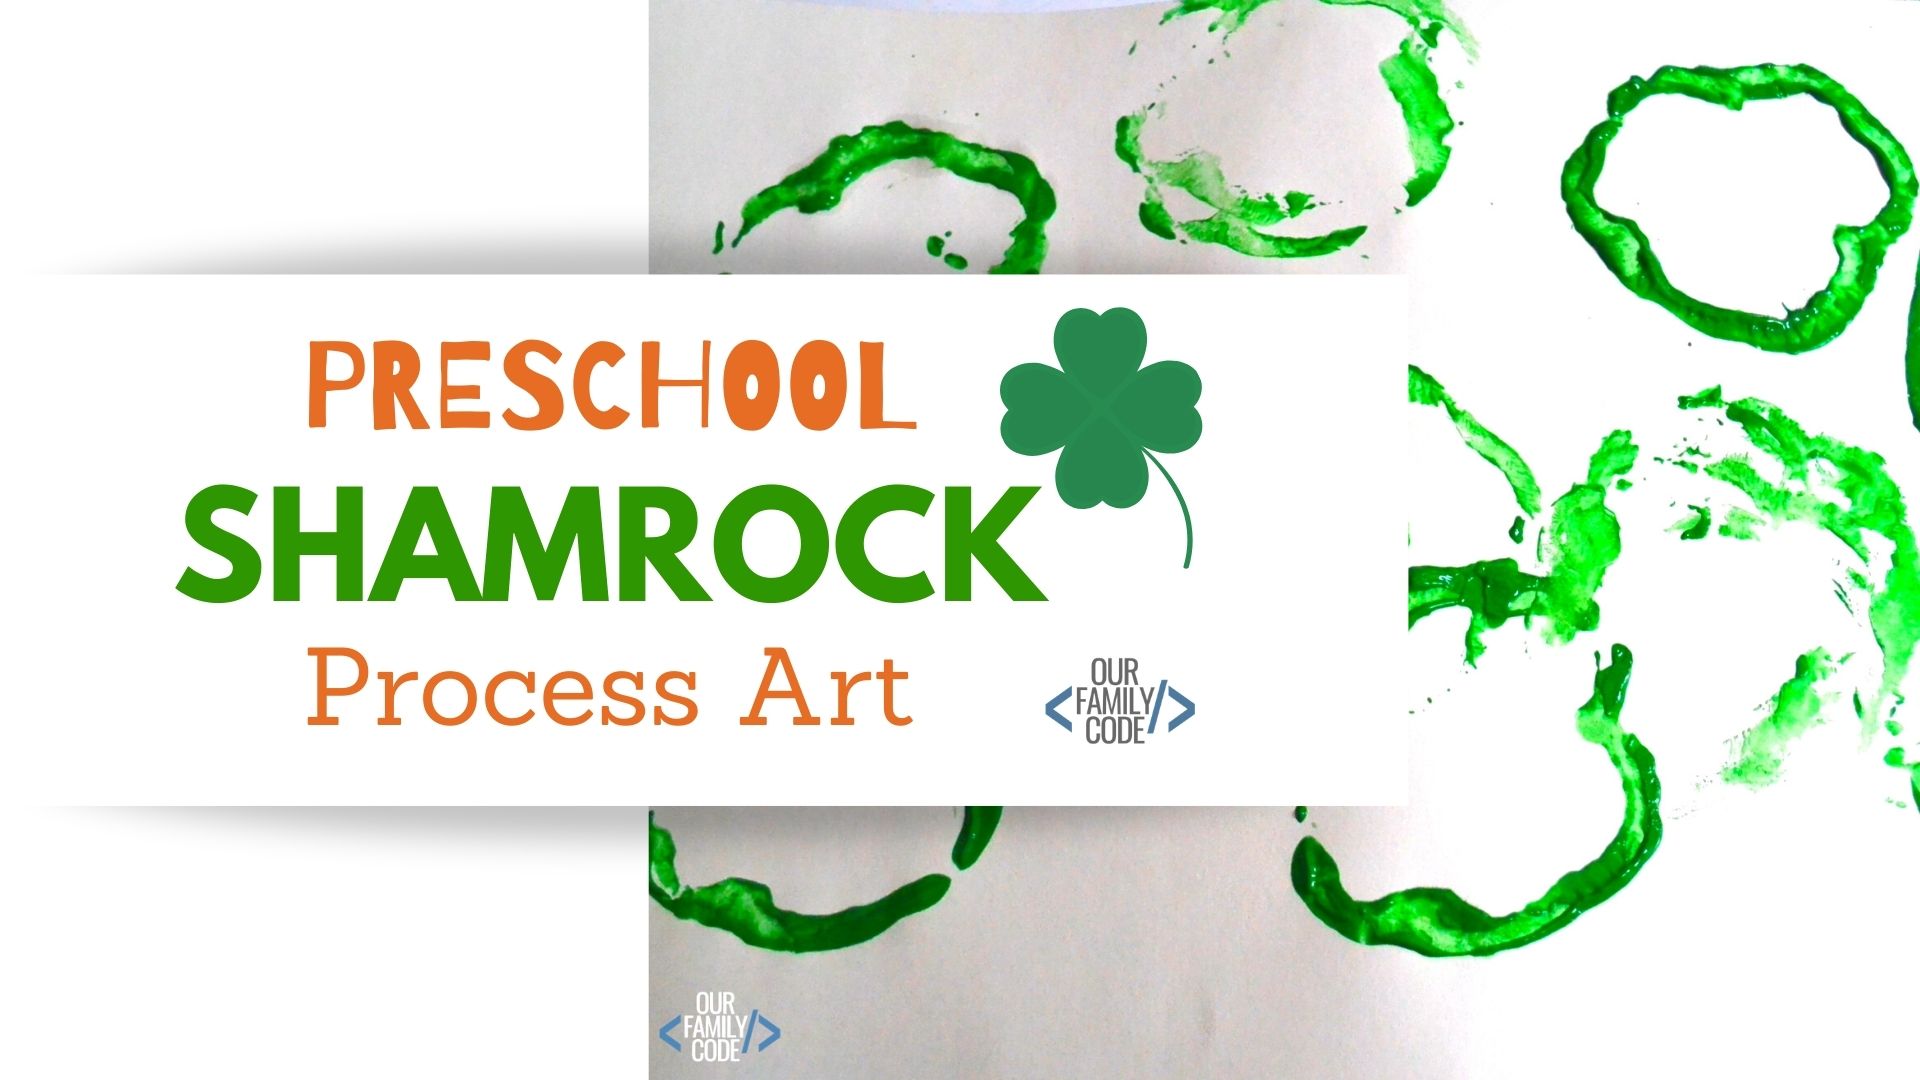 Make preschool shamrock process art with green peppers for a great sensory learning experience! #preschool #homeschool #totschool #processart #sensoryactivities #toddlerart #toddlercrafts